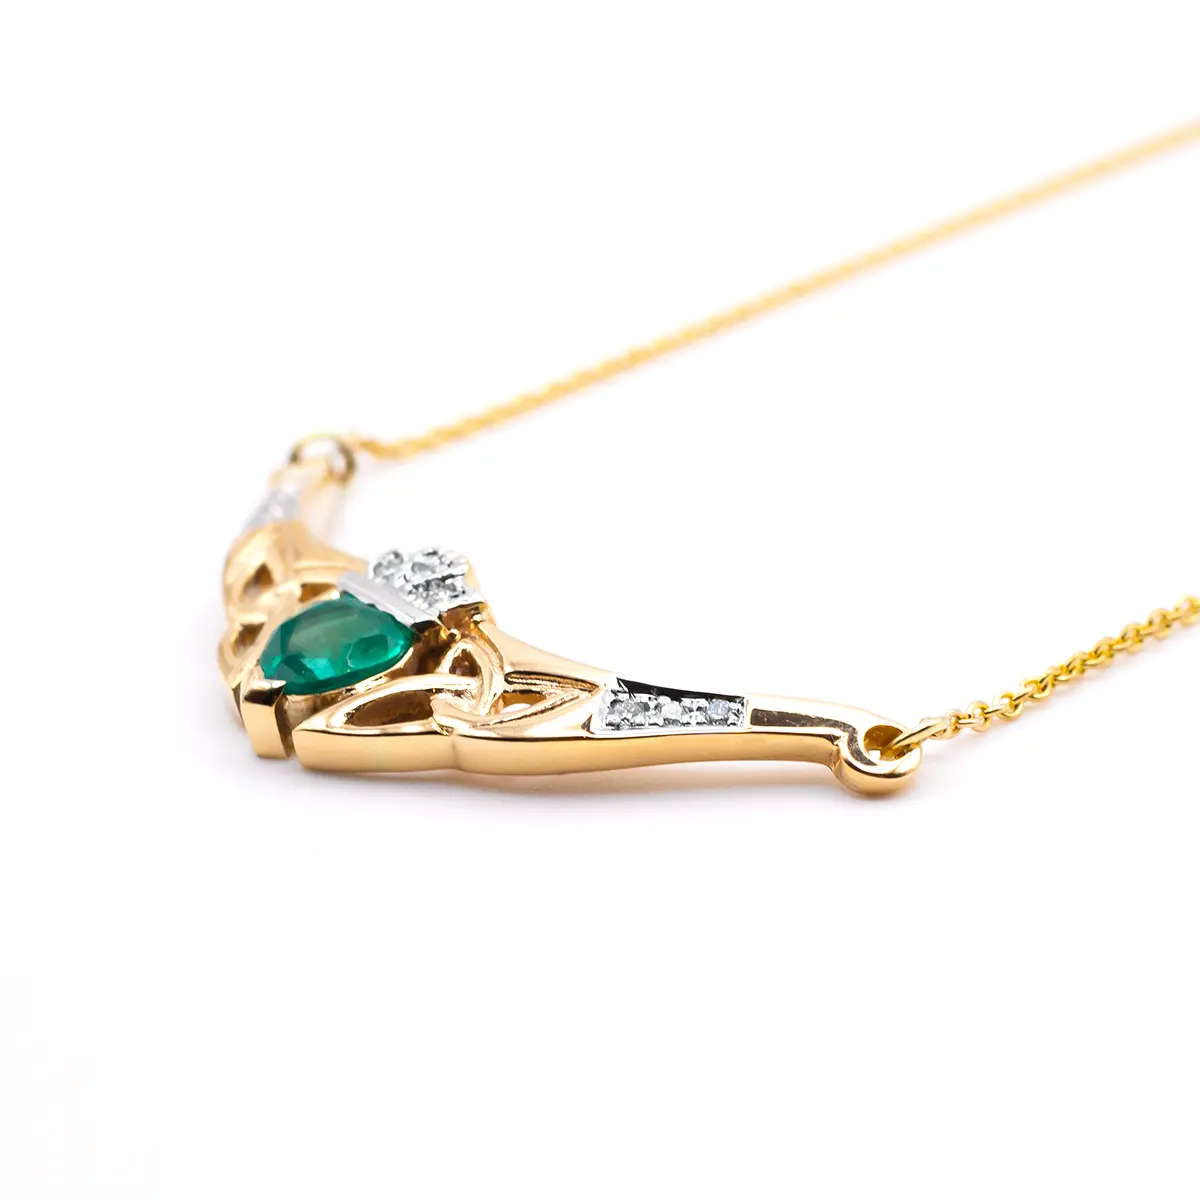 10ct Gold and Emerald Claddagh Necklace | Facet Jewellers